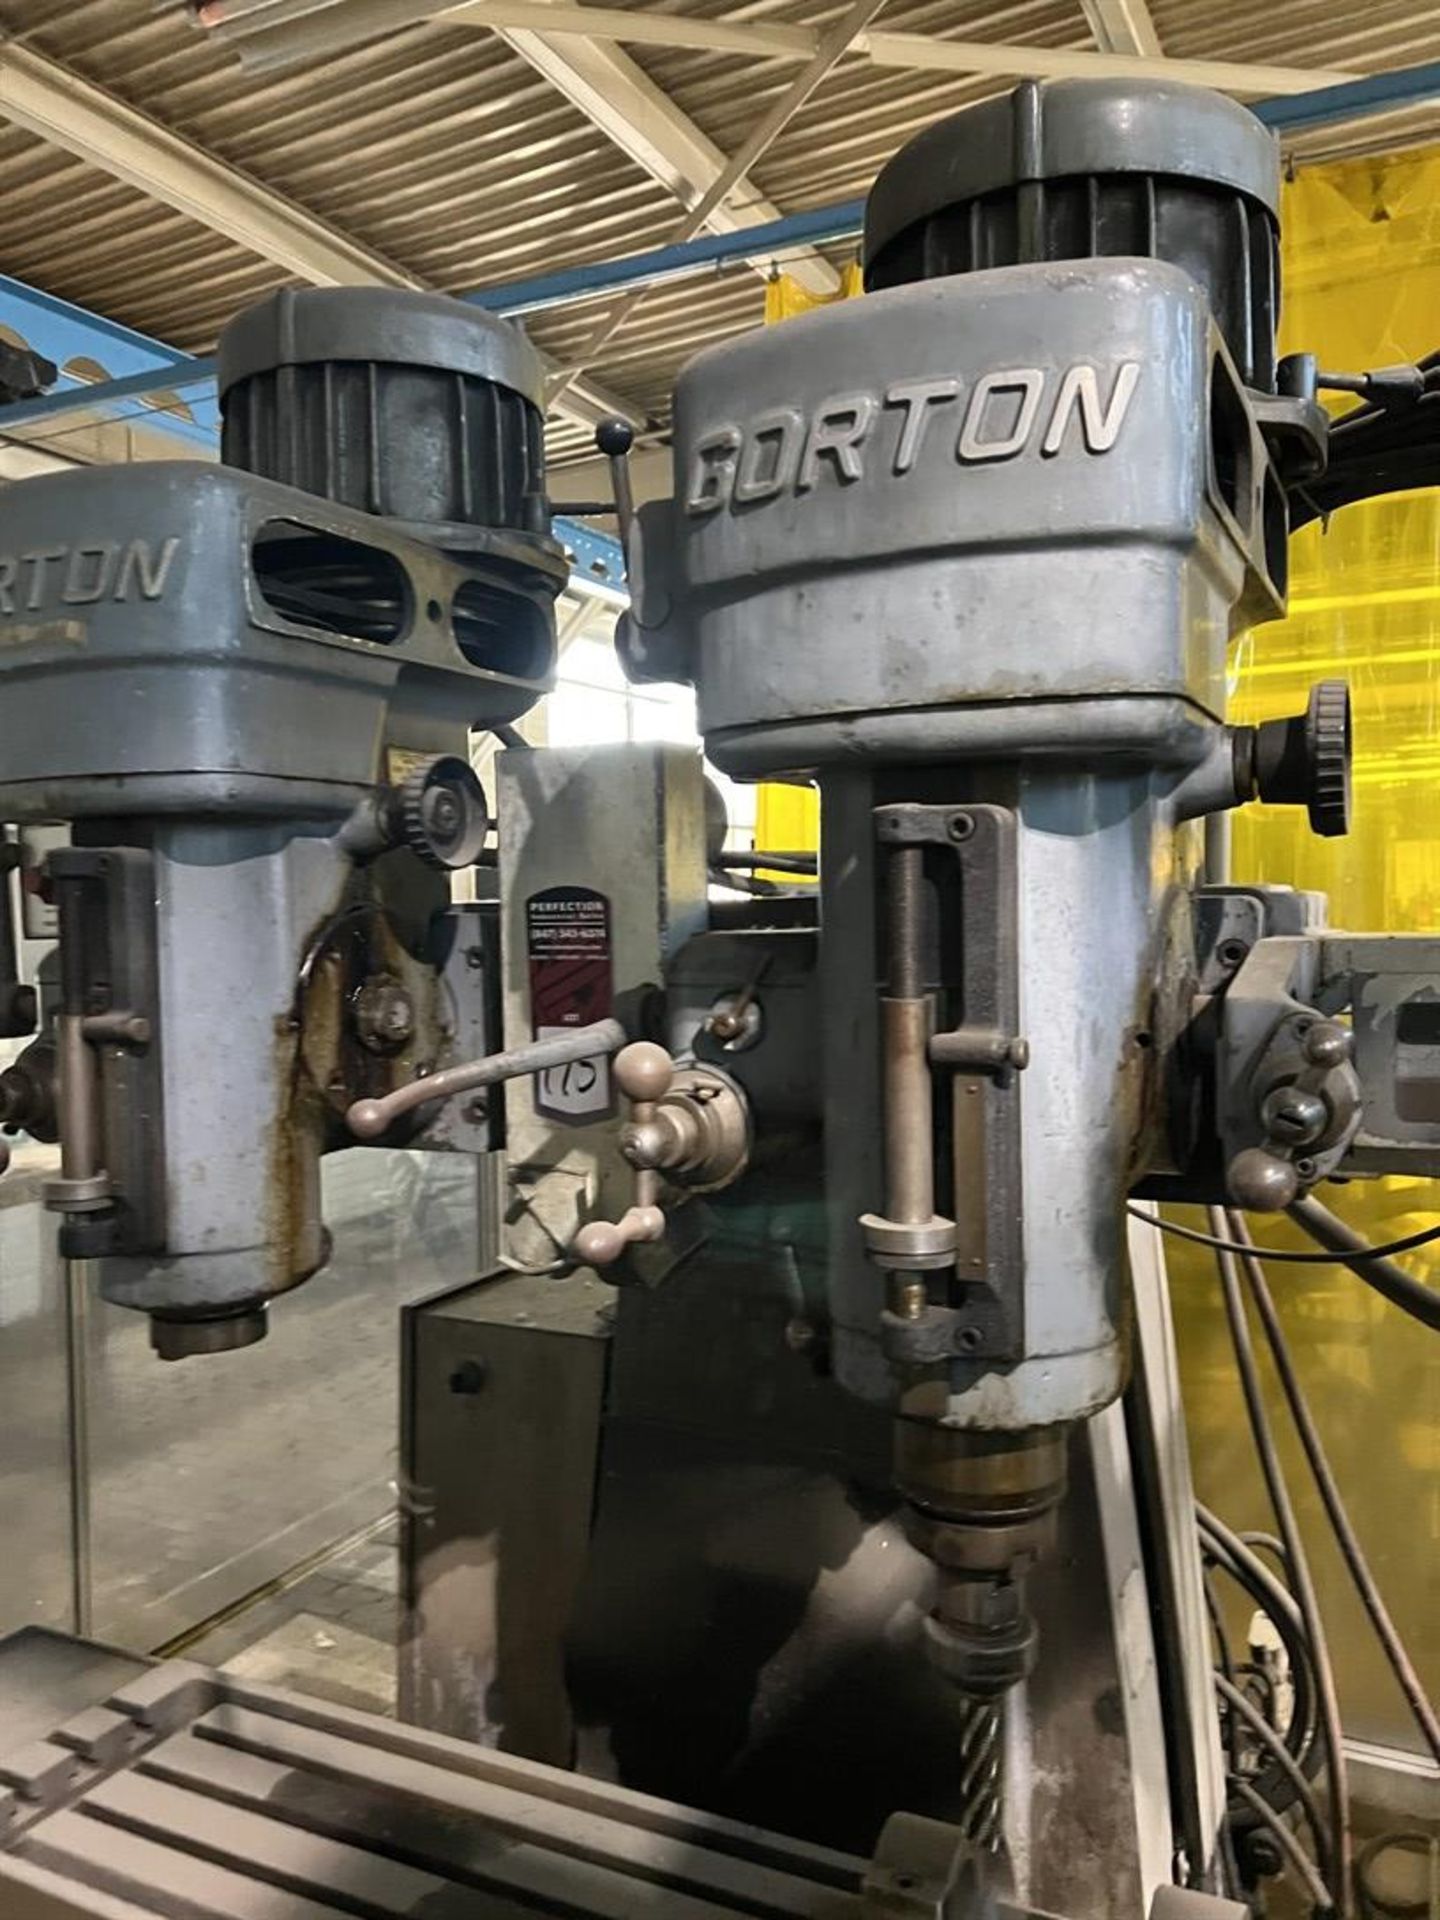 GORTON 2-30 Tracer Master Twin Head Tracer Mill, 80-5600 RPM, 12” x 77” w/ Extension, 3 HP Heads, w/ - Image 3 of 6